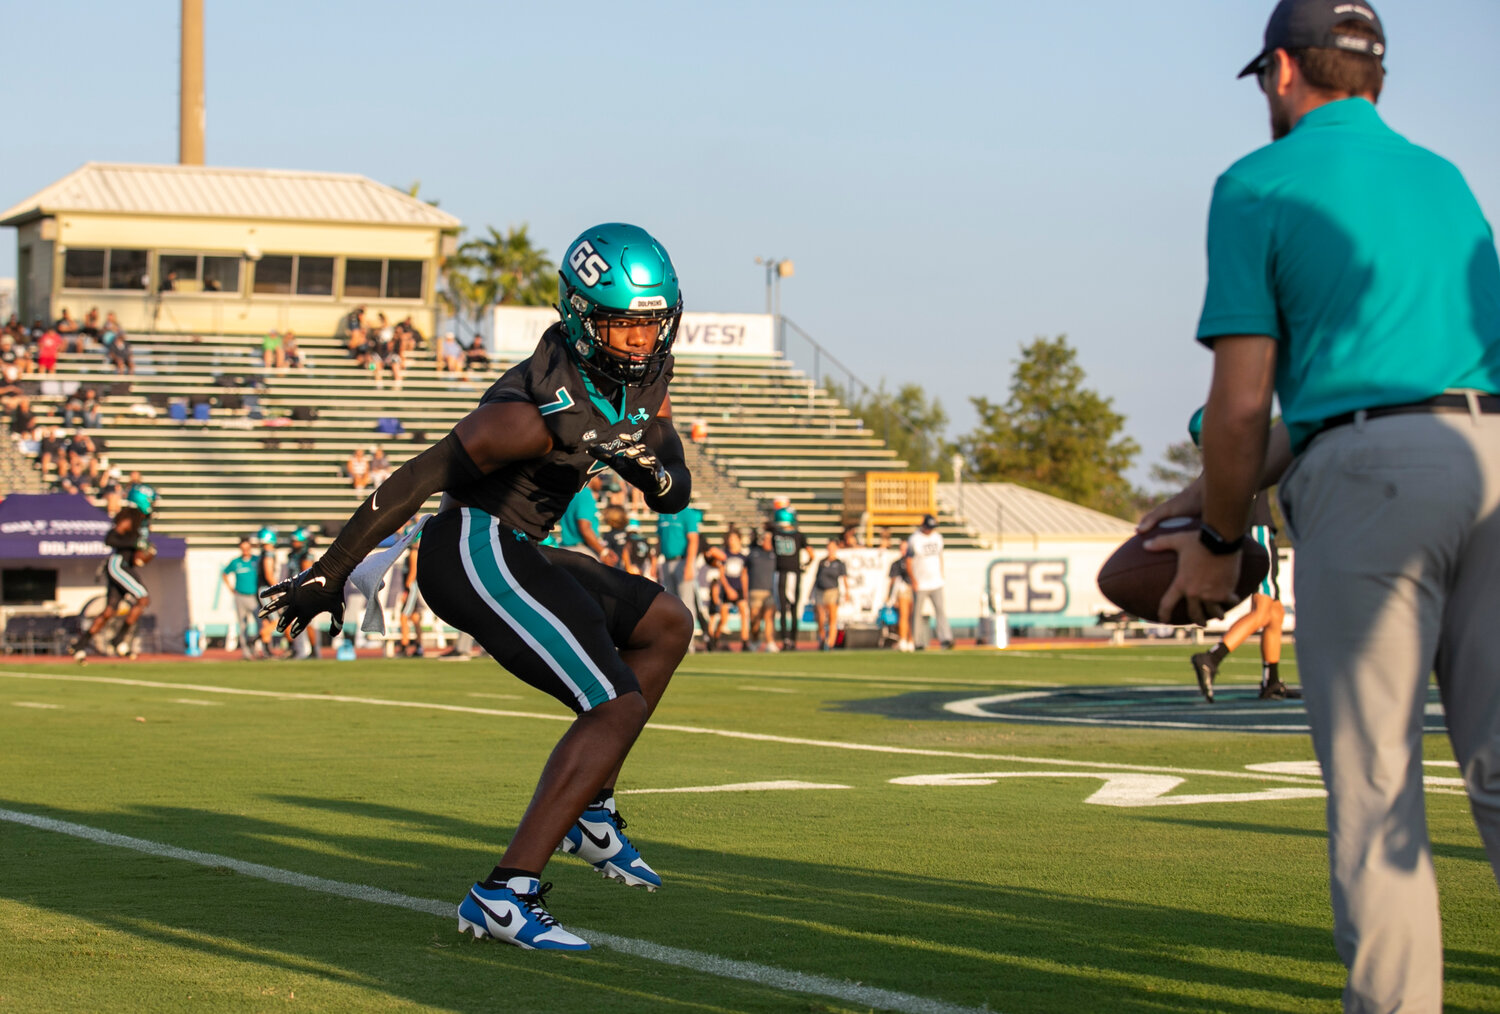 Gulf Shores sophomore Jamichael Garrett goes through pregame warmups before the Dolphins’ Class 5A Region 1 contest against the UMS-Wright Bulldogs at home on Friday, Sept. 15. Garrett contributed 4 total tackles including 3 for loss in last week’s shutout win over LeFlore.